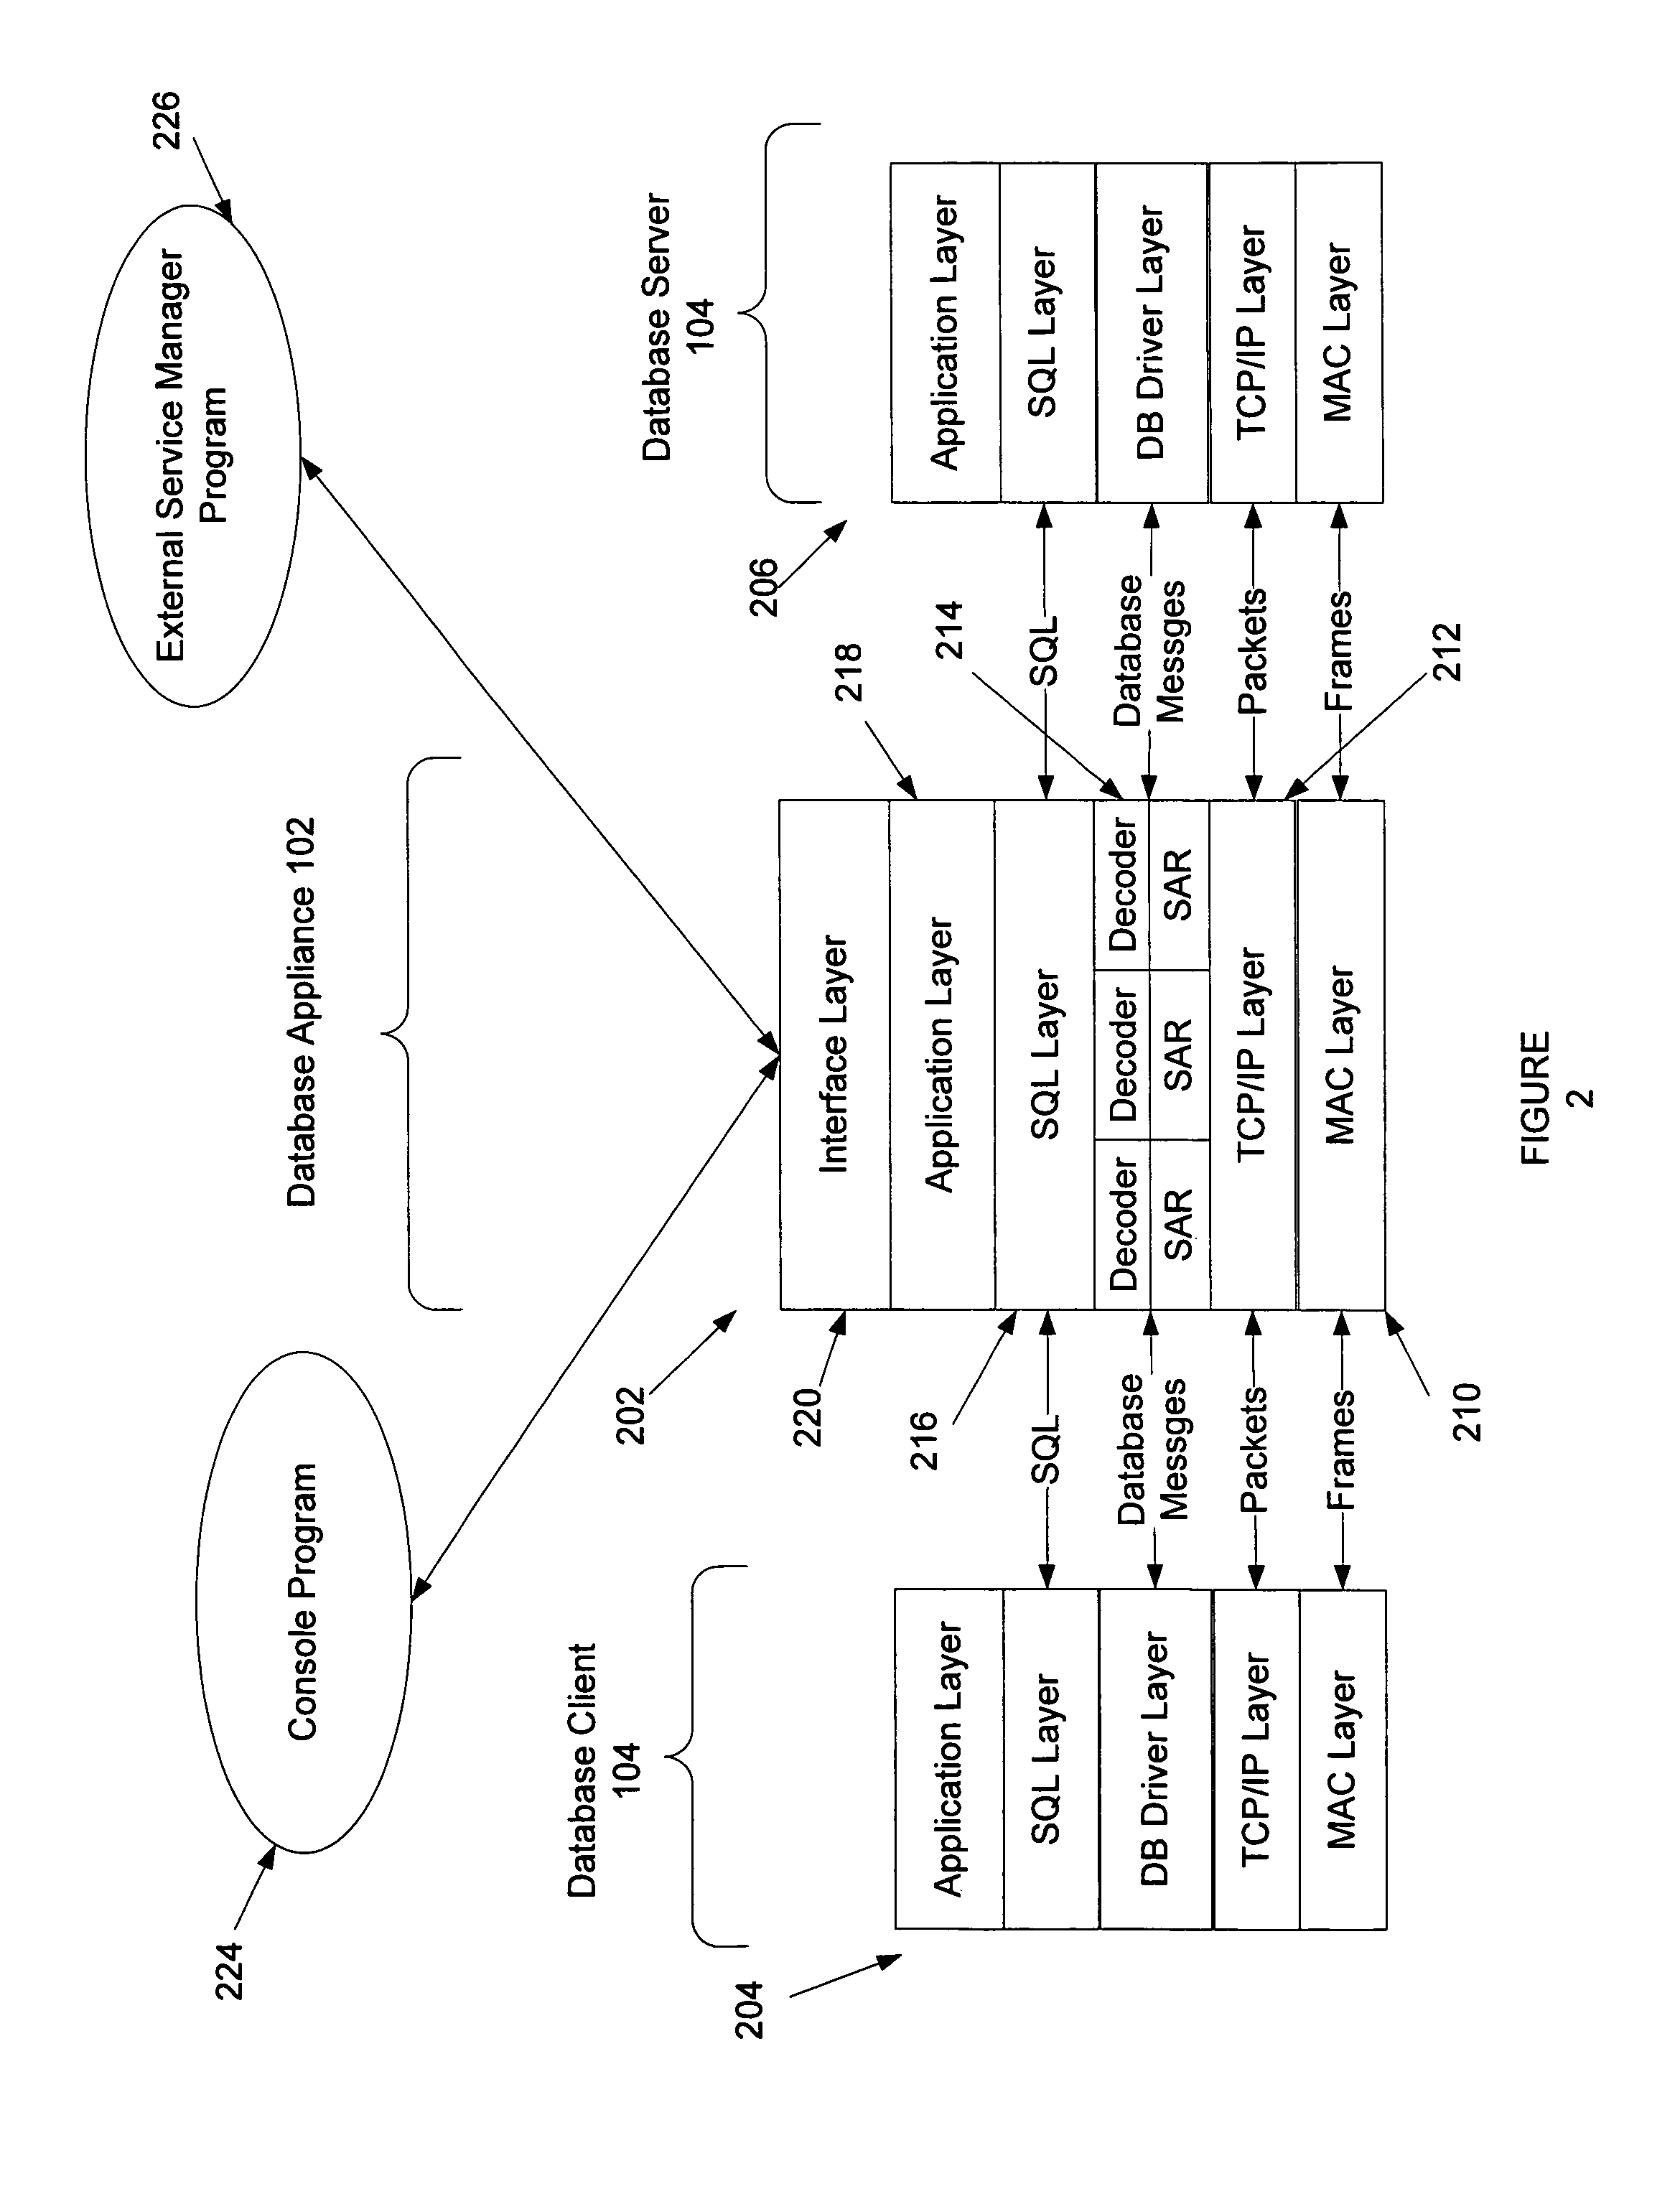 System and method for providing service management in a distributed database system